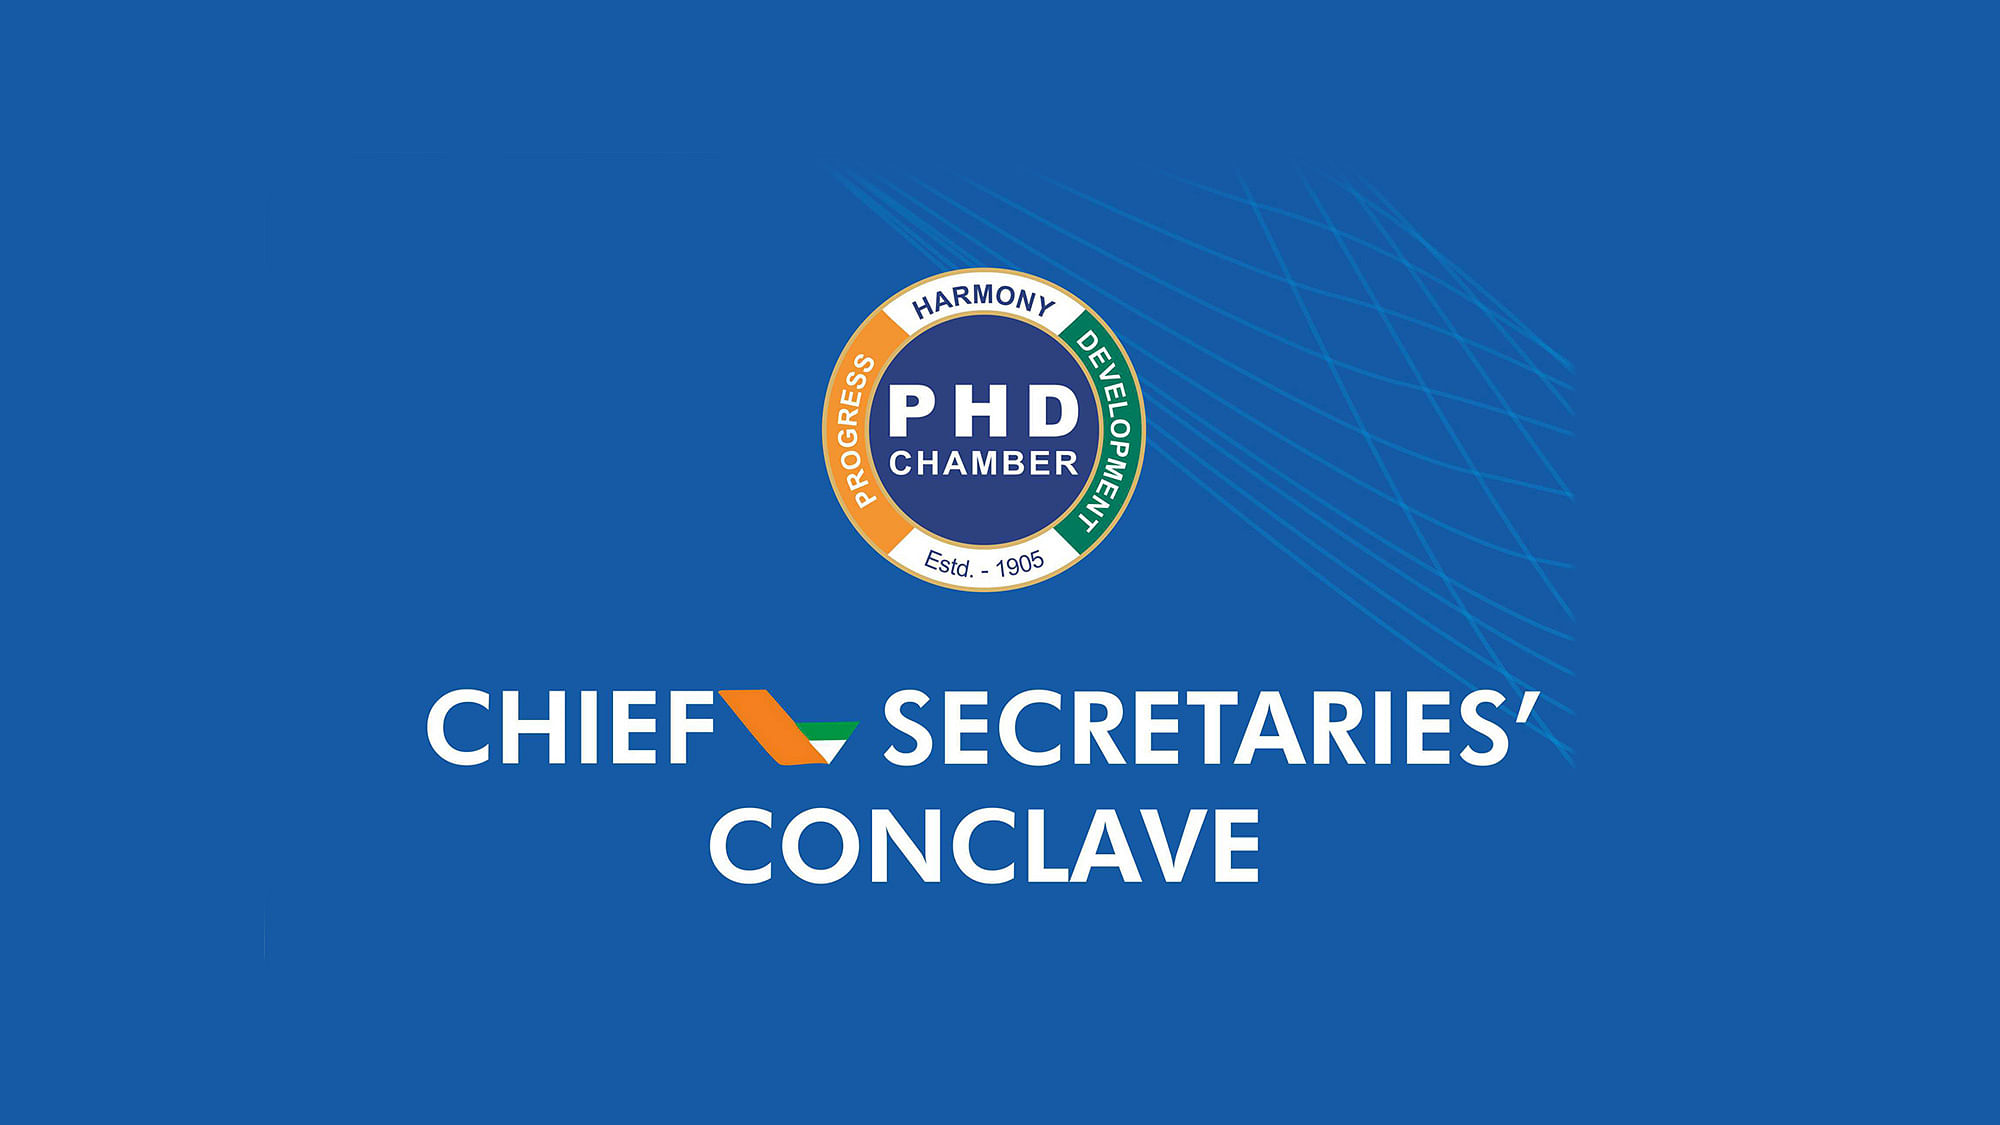 The PHD Chamber of Commerce and Industry’s flagship event, Chief Secretaries’ Conclave, will be held on Saturday.